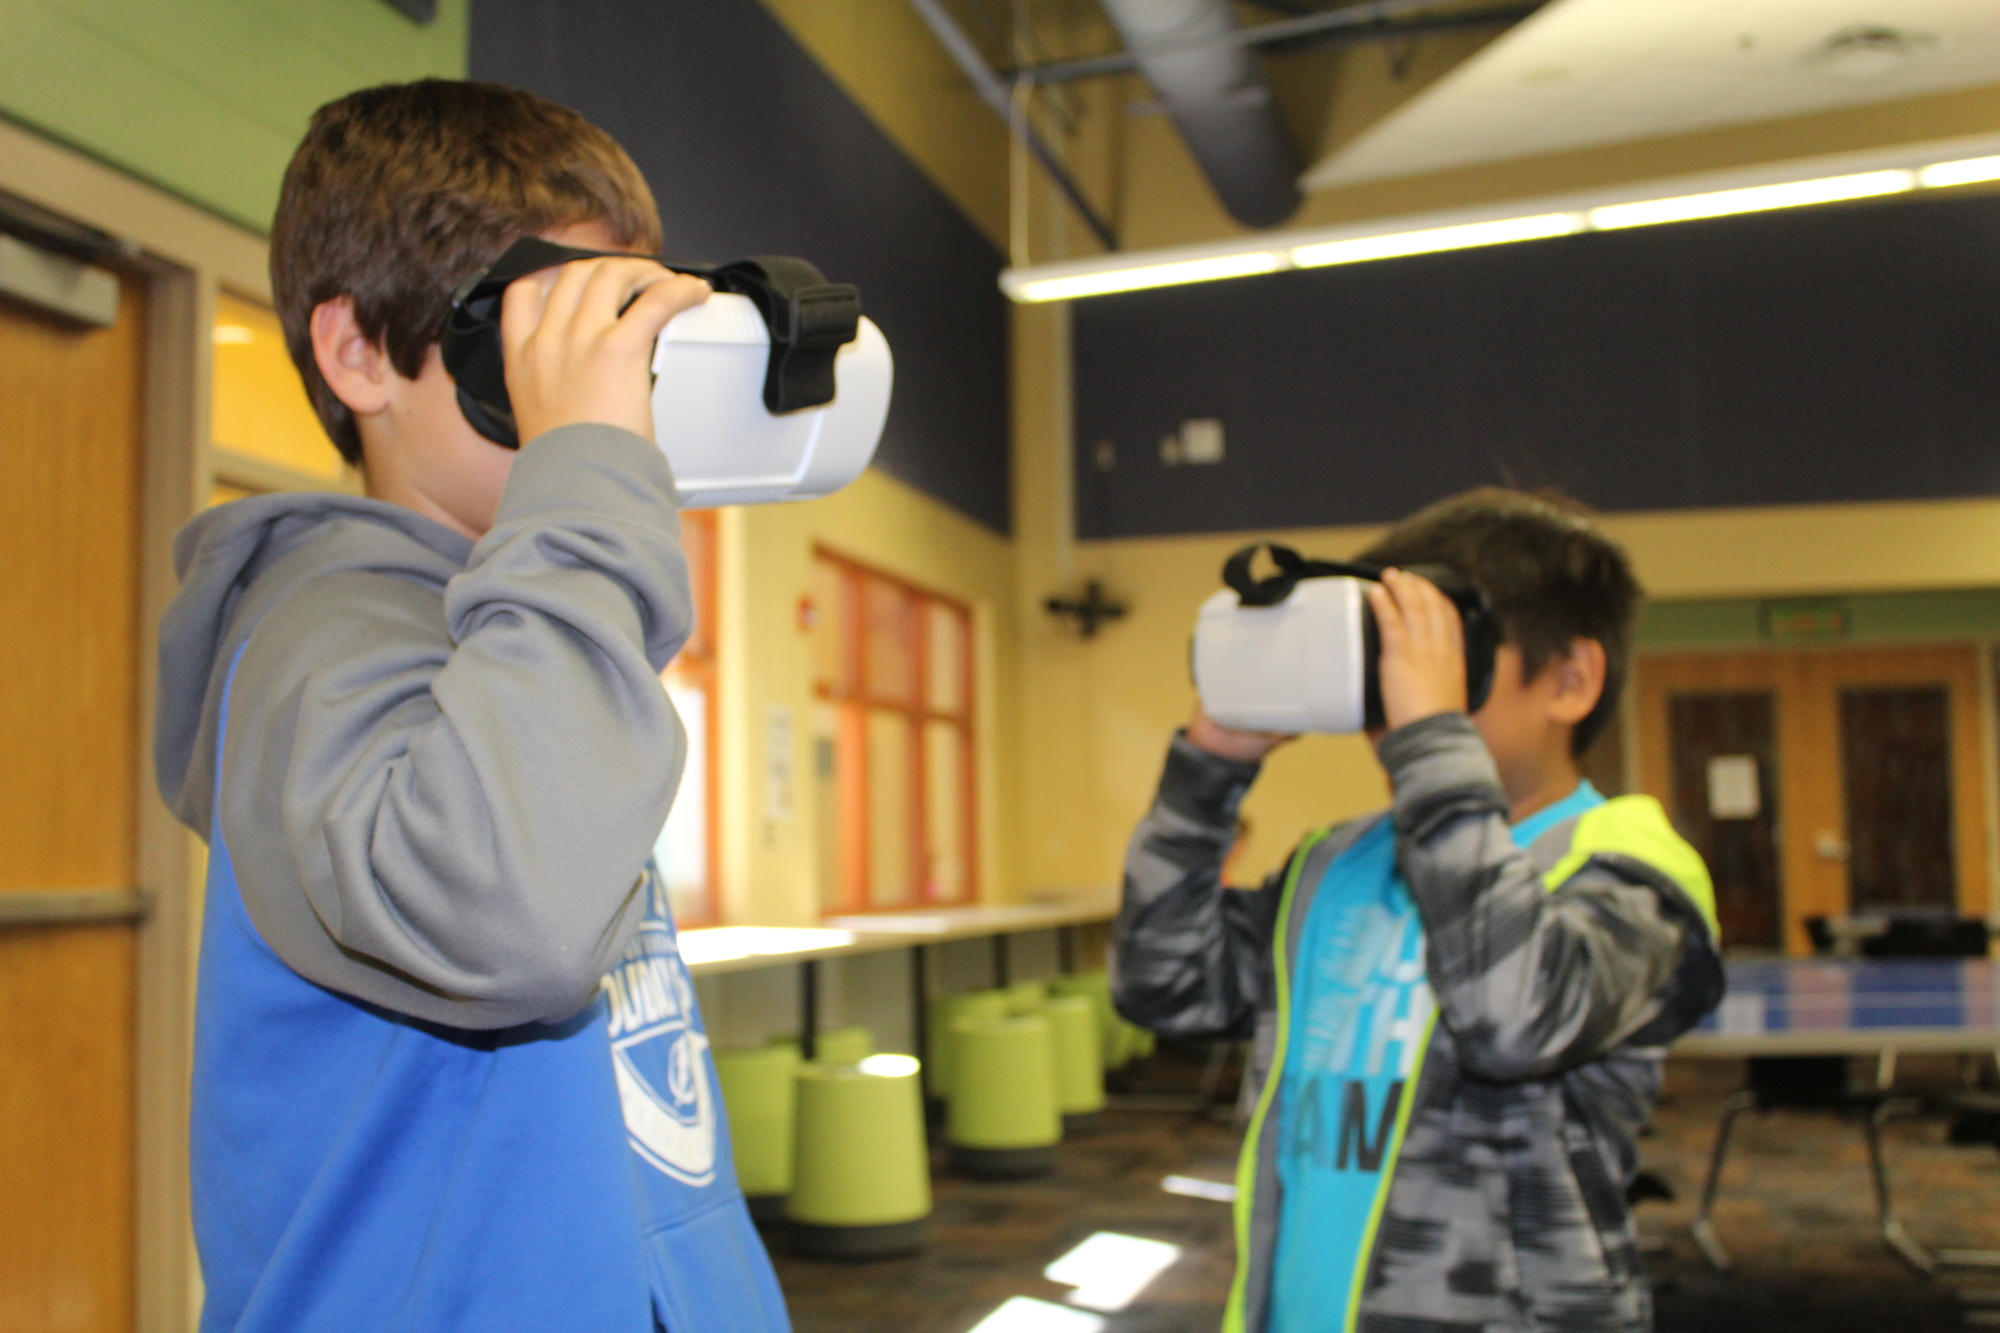 McNeal Elementary School third-graders Michael Geaglone and Kaden Oda go on a virtual reality adventure. Their teacher, Carolyn Wingnet, will purchase new VR sets and iPods with the grant money from the Manatee Education Foundatio